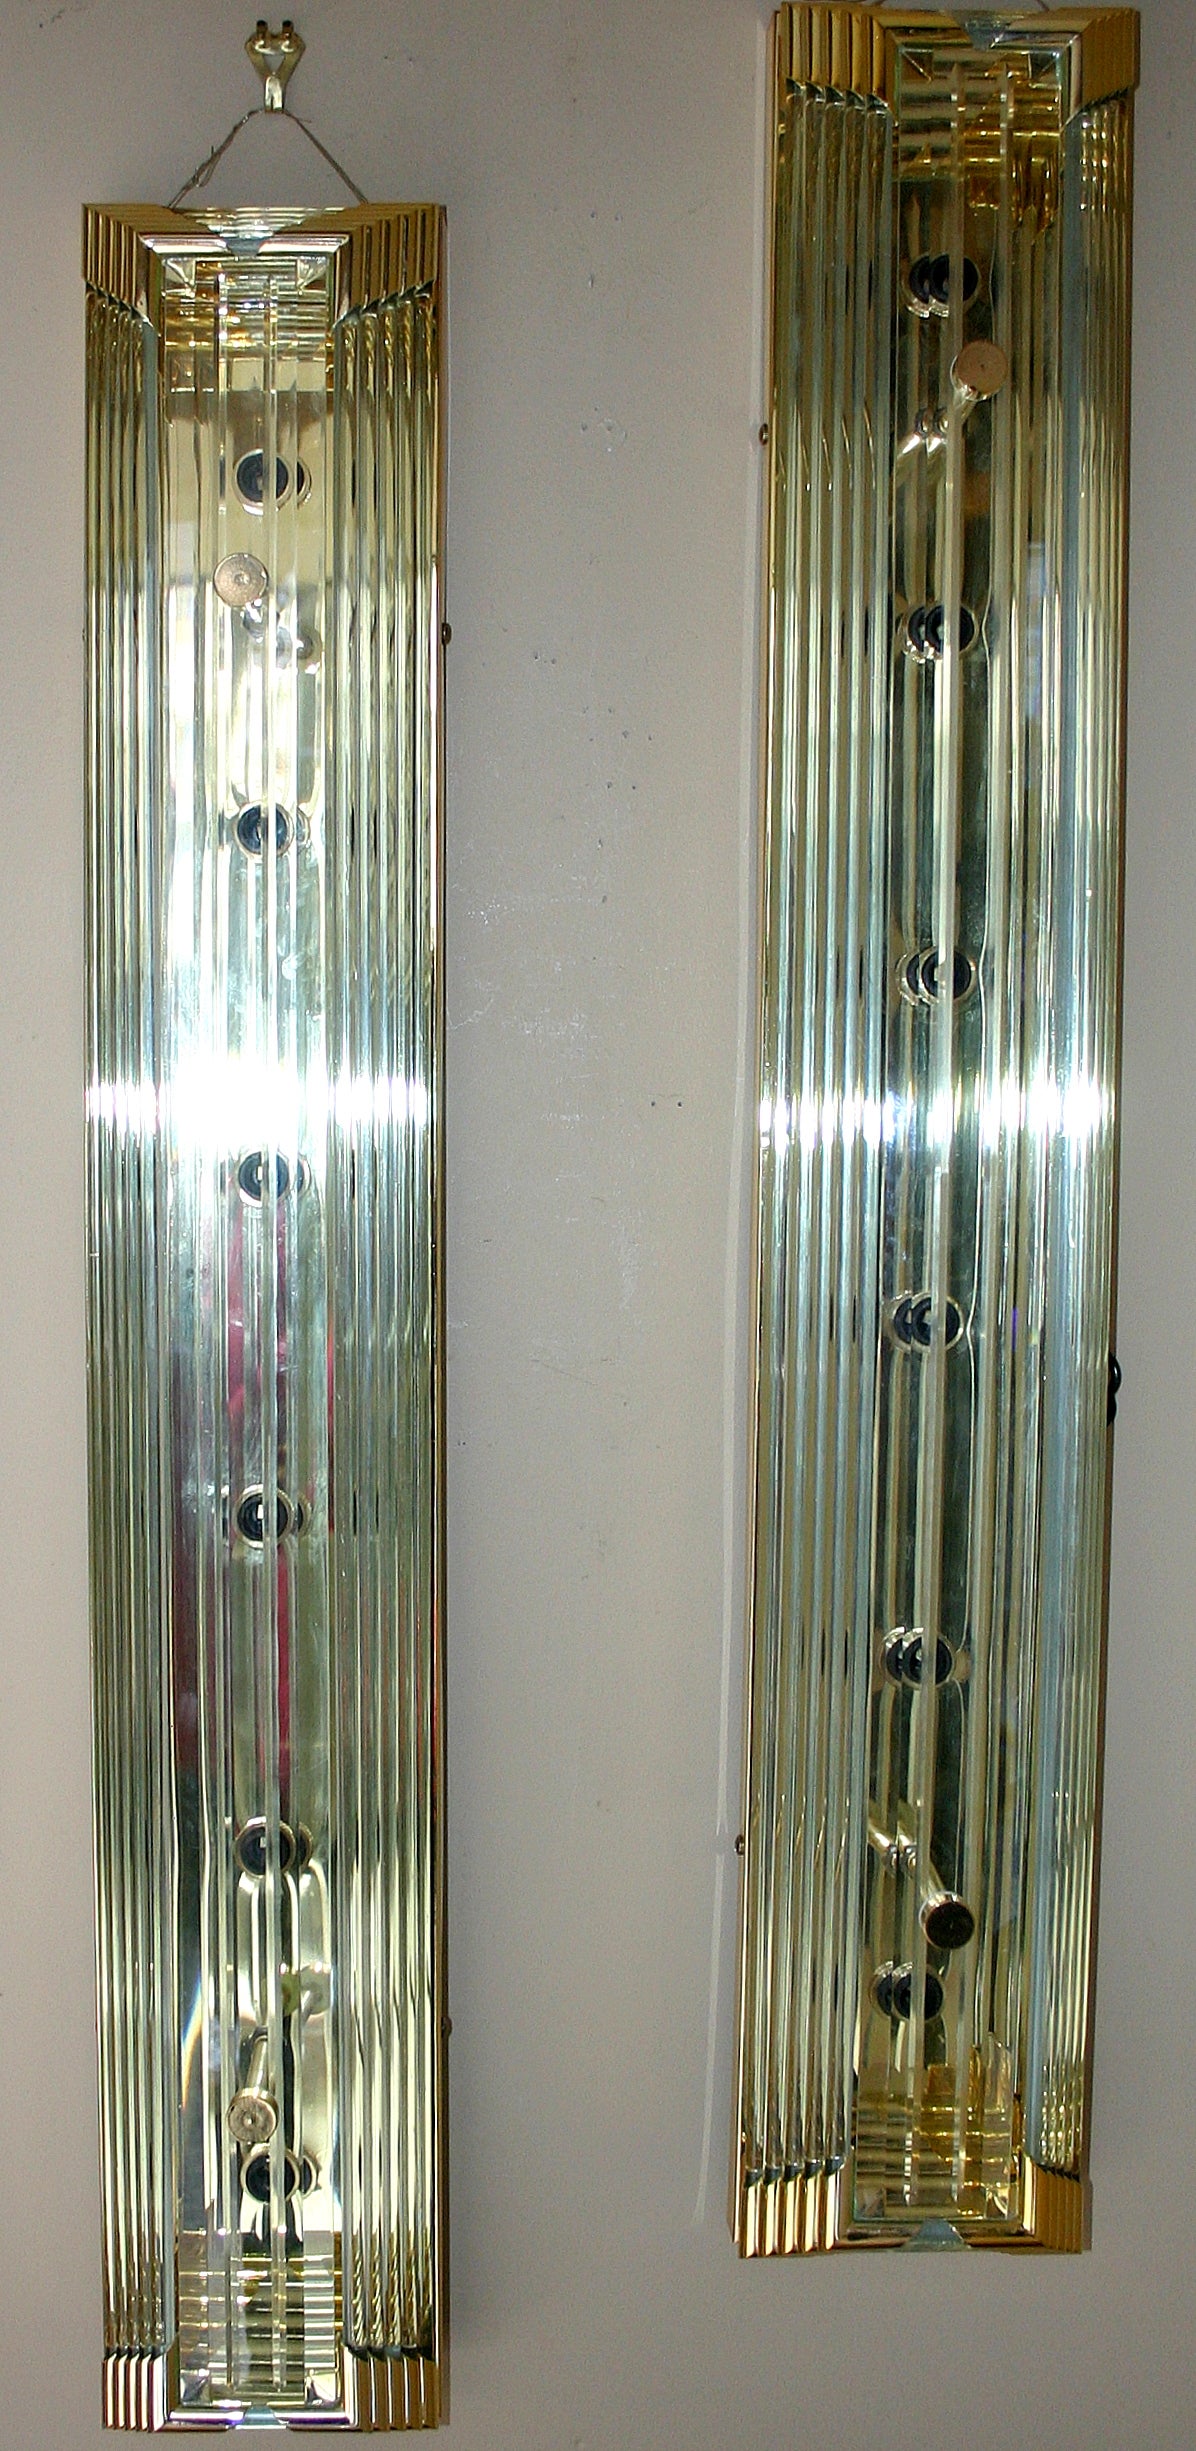 Pair of circa 1960s Italian moderne style sconces with glass rods on sides and 6 interior lights.

Measurements:
Height 36